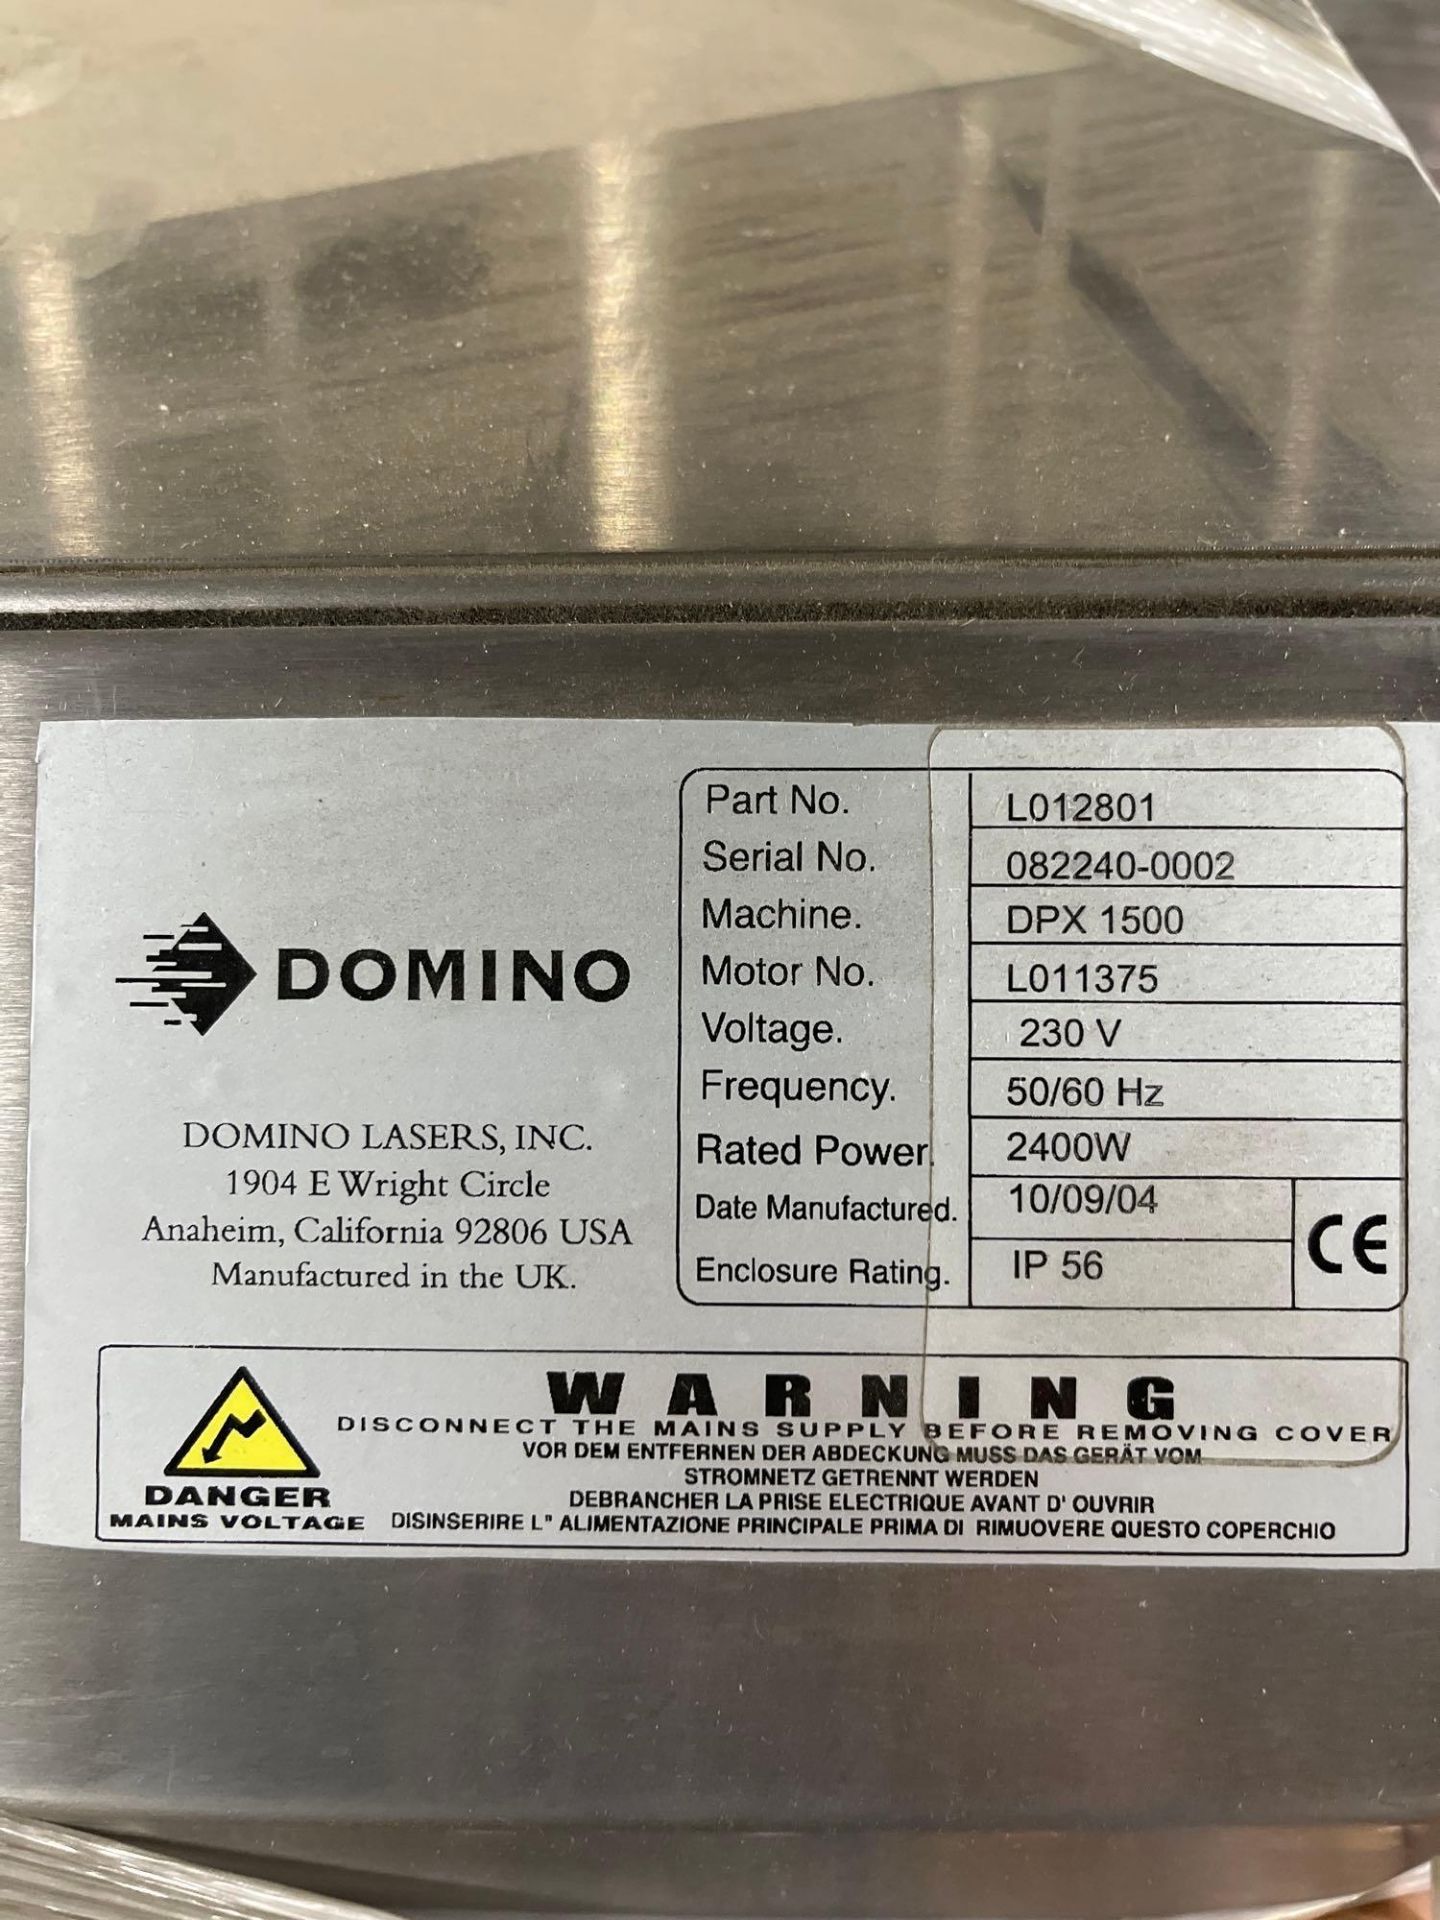 Domino DPX 1500 Laser Marking System - Image 2 of 3